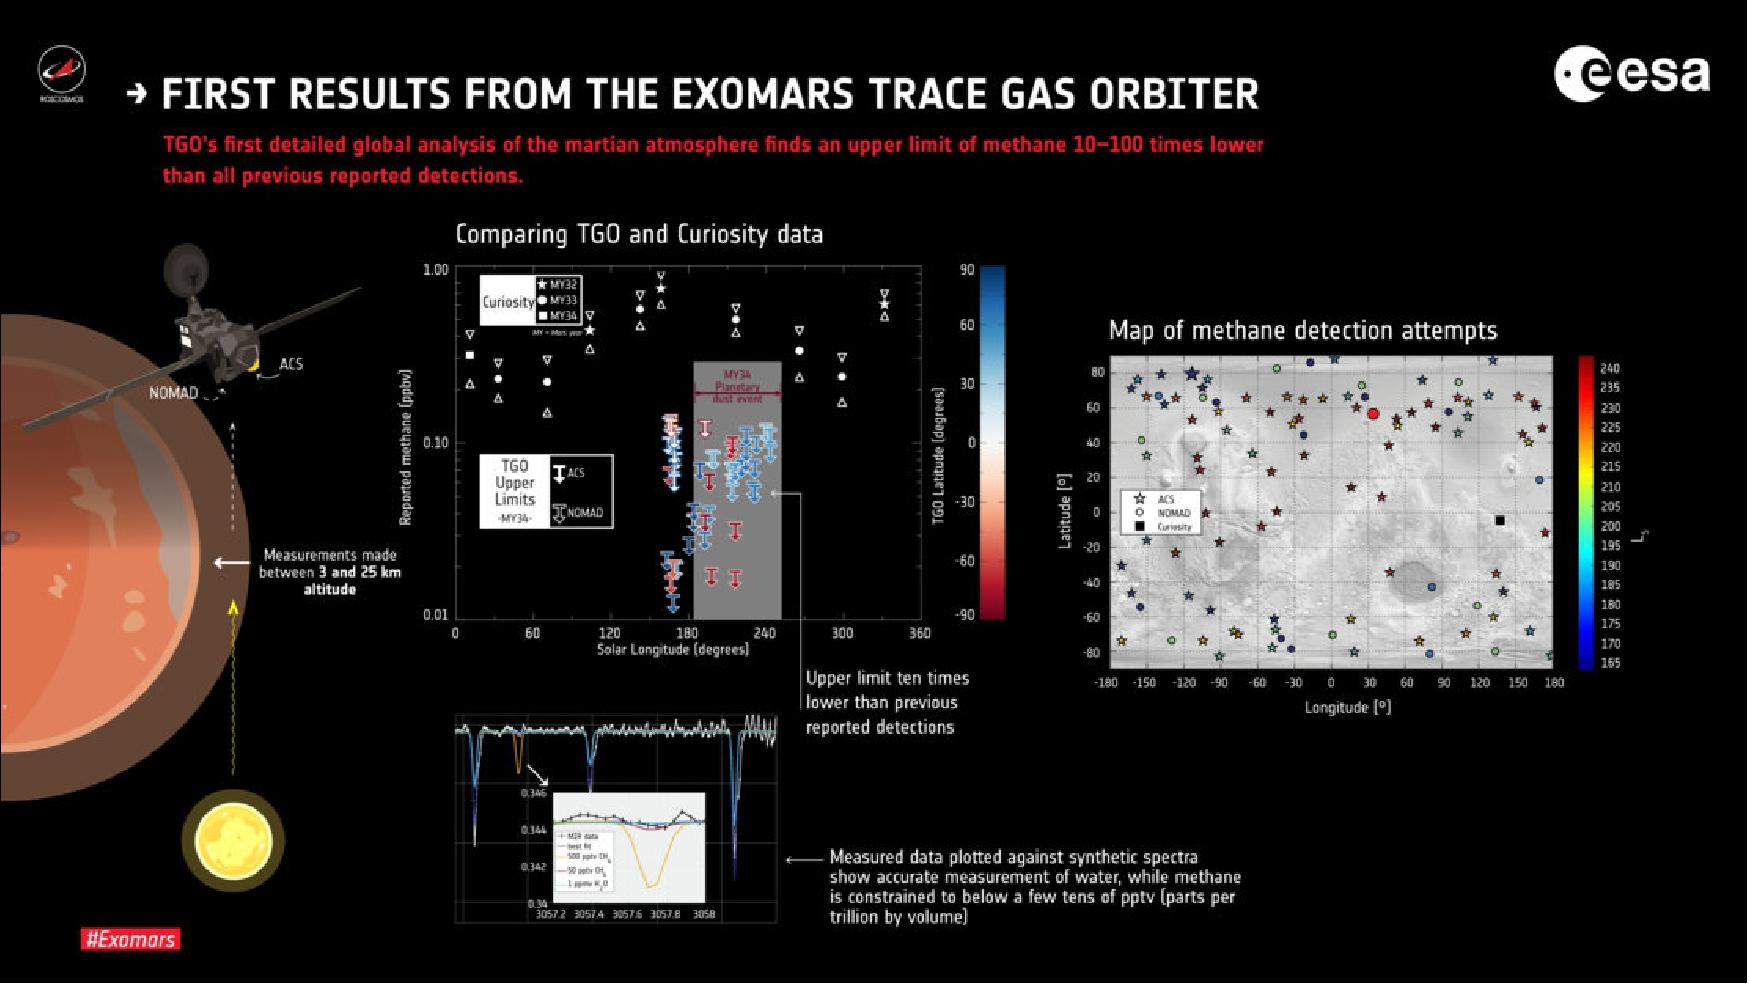 Figure 69: The ExoMars Trace Gas Orbiter’s first analysis of the martian atmosphere at various points around the globe finds an upper limit of methane 10–100 times less than all previous reported detections. The measured data show the sensitivity of the ACS and NOMAD instruments when looking at other molecules, such as water, while methane is apparently absent: the results suggest an upper limit of 0.05 parts per billion (ppbv), — The difference between TGO’s dataset and that of NASA’s Curiosity, which previously reported a seasonal background variation of methane, is presented, noting that the highest sensitivity of TGO’s measurements was achieved before the global dust storm that engulfed the planet in mid 2018, soon after the start of TGO’s science mission. A map with the locations where TGO’s detection attempts were made is also provided, with the majority of measurements taken over high latitudes. - To reconcile the differing results, a better understanding of the different mechanisms able to destroy methane close to the surface of the planet is needed [image credit: ESA; spacecraft: ATG/medialab; data: O. Korablev et al (2019)]